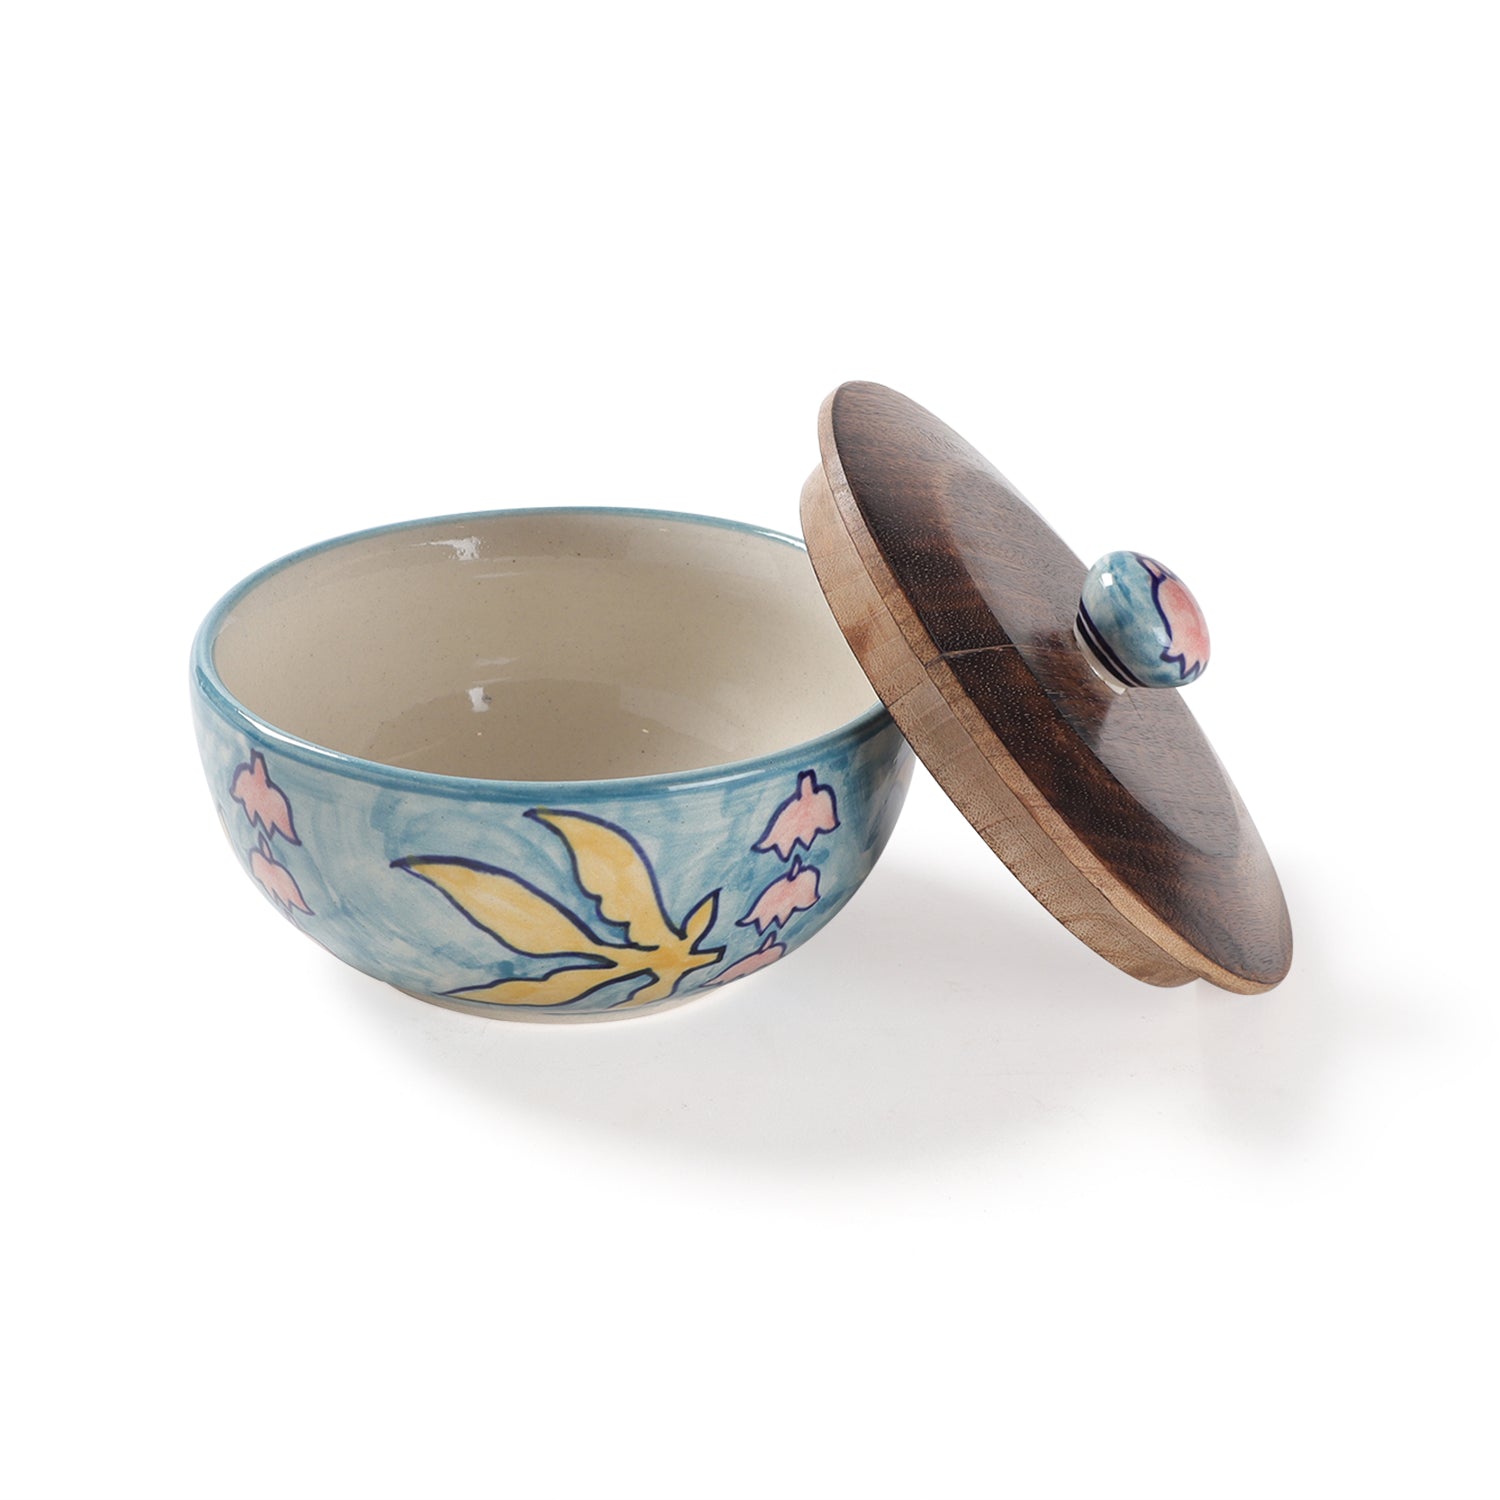 Handpainted Ceramic Serving Bowls with Lid 7.5" - Set of 2